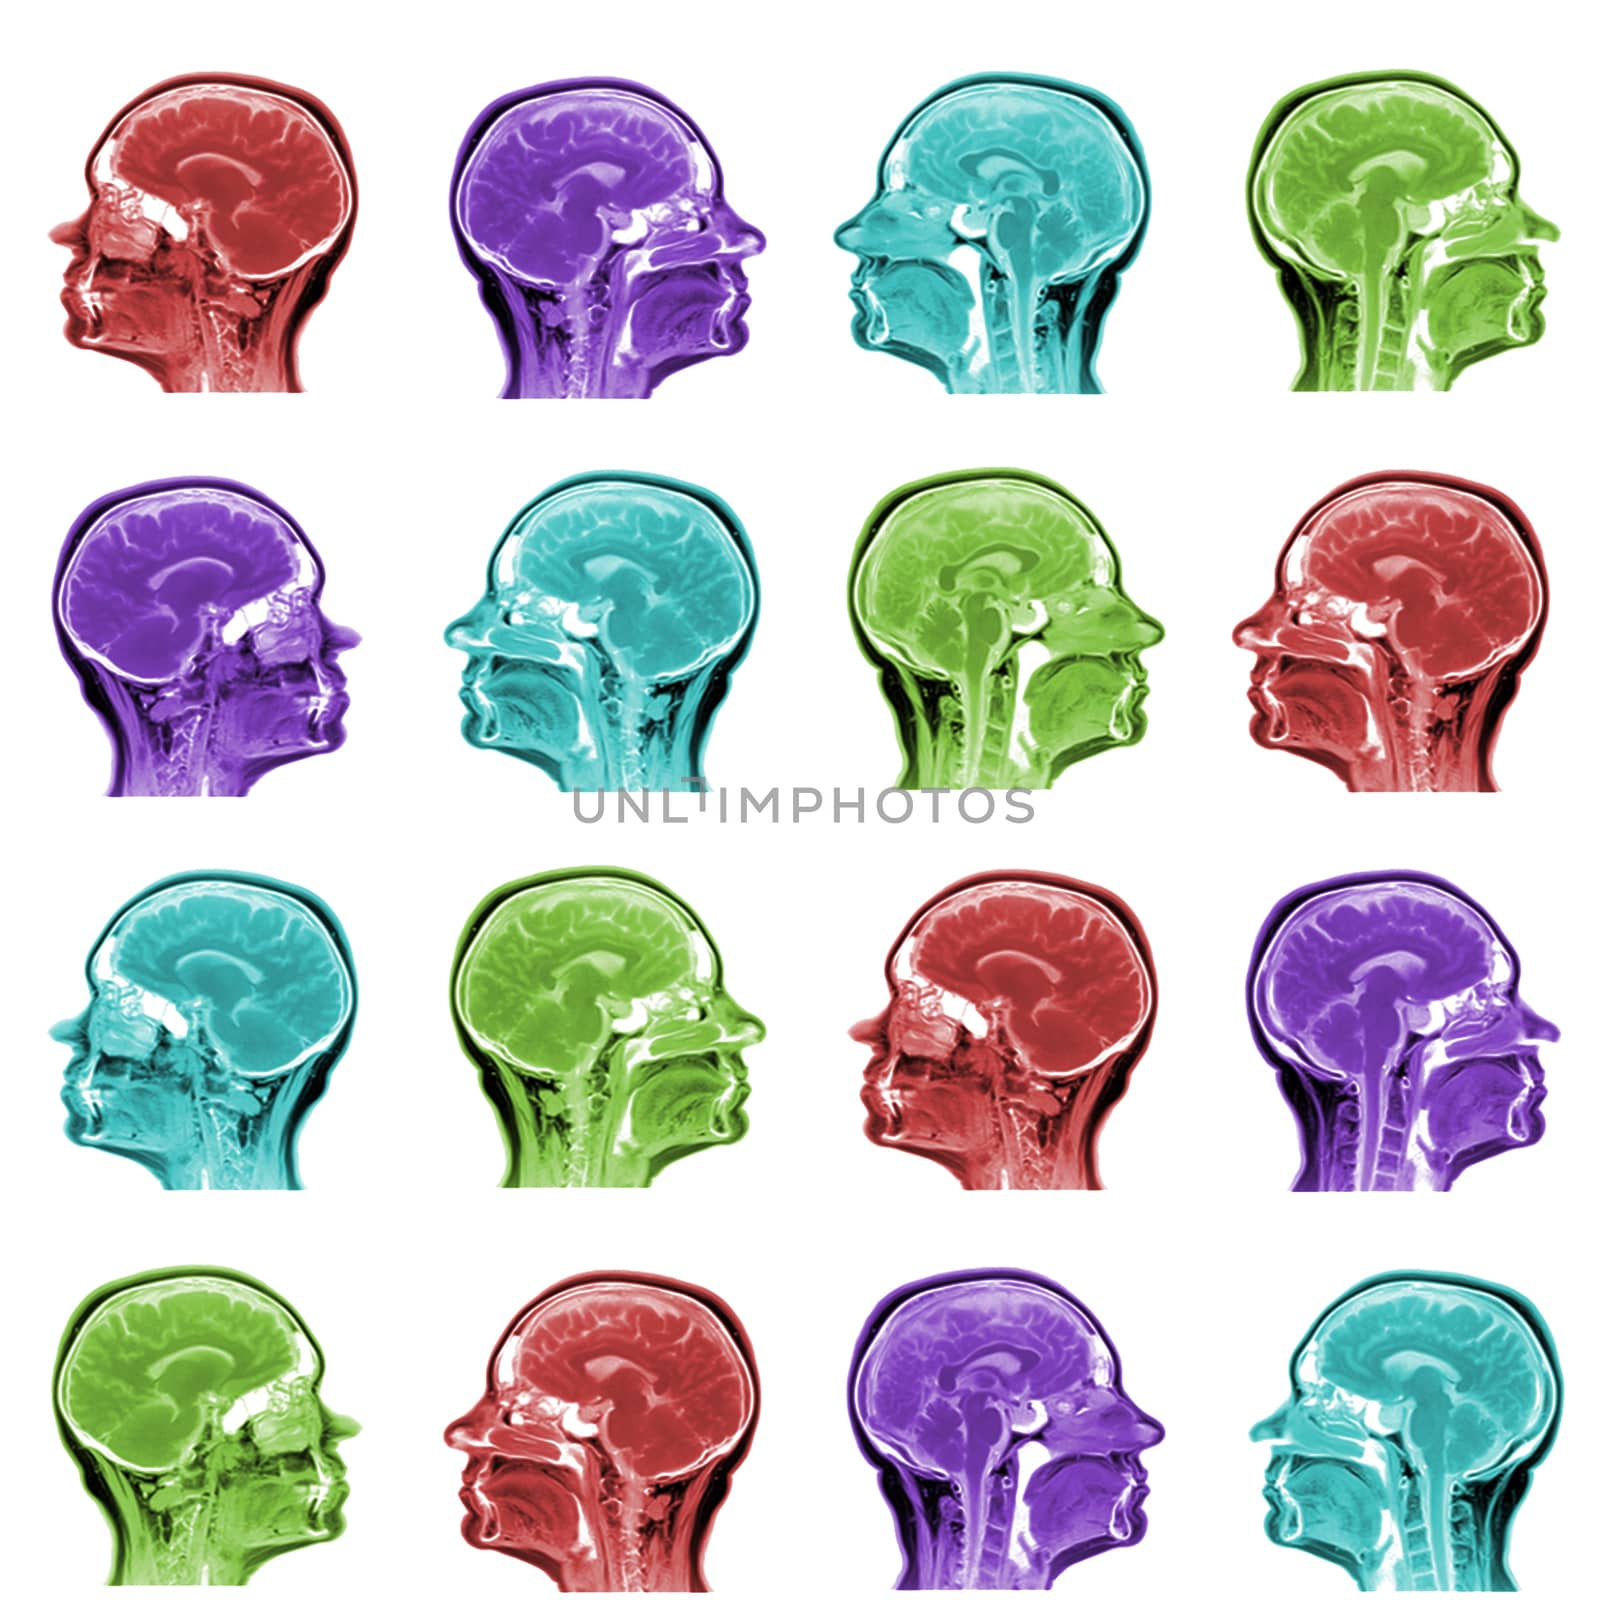 seamless pattern of MRI scans of sixty years old caucasian female head in sagittal or longitudinal plane - colored heads on white background by z1b